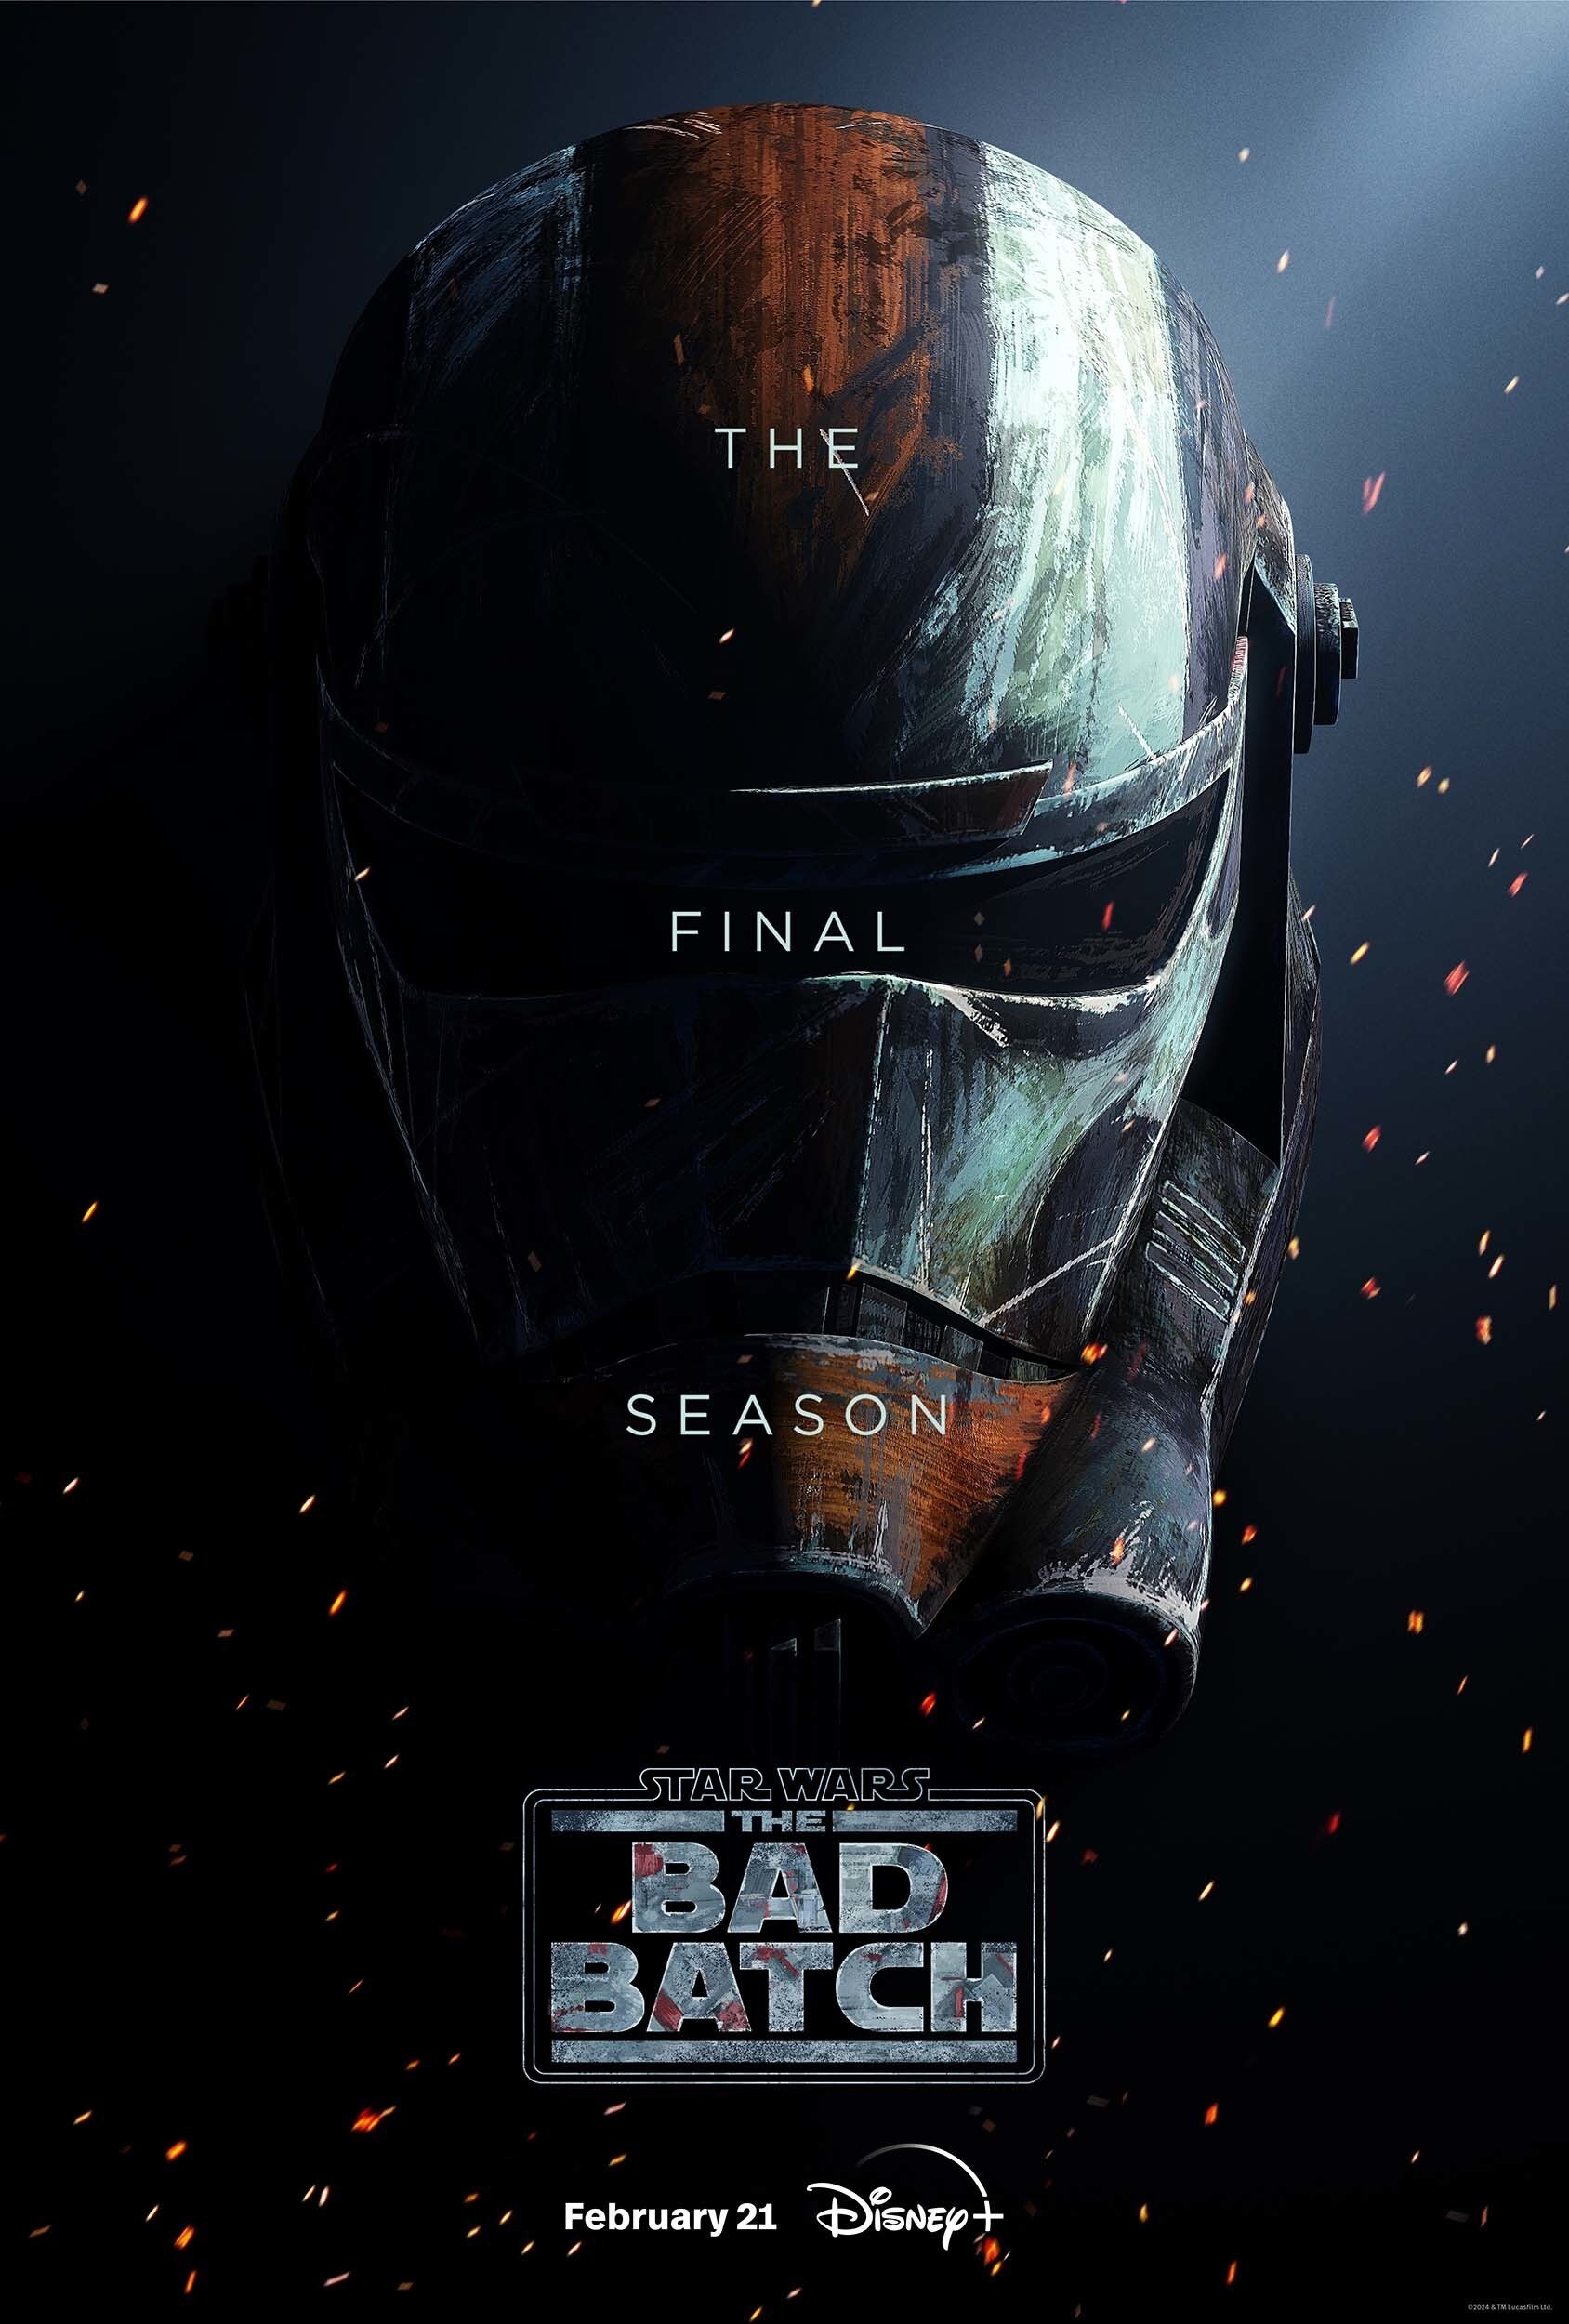 Disney+ Unveils New Trailer And Teaser Poster For Lucasfilm's “Star Wars:  The Bad Batch”